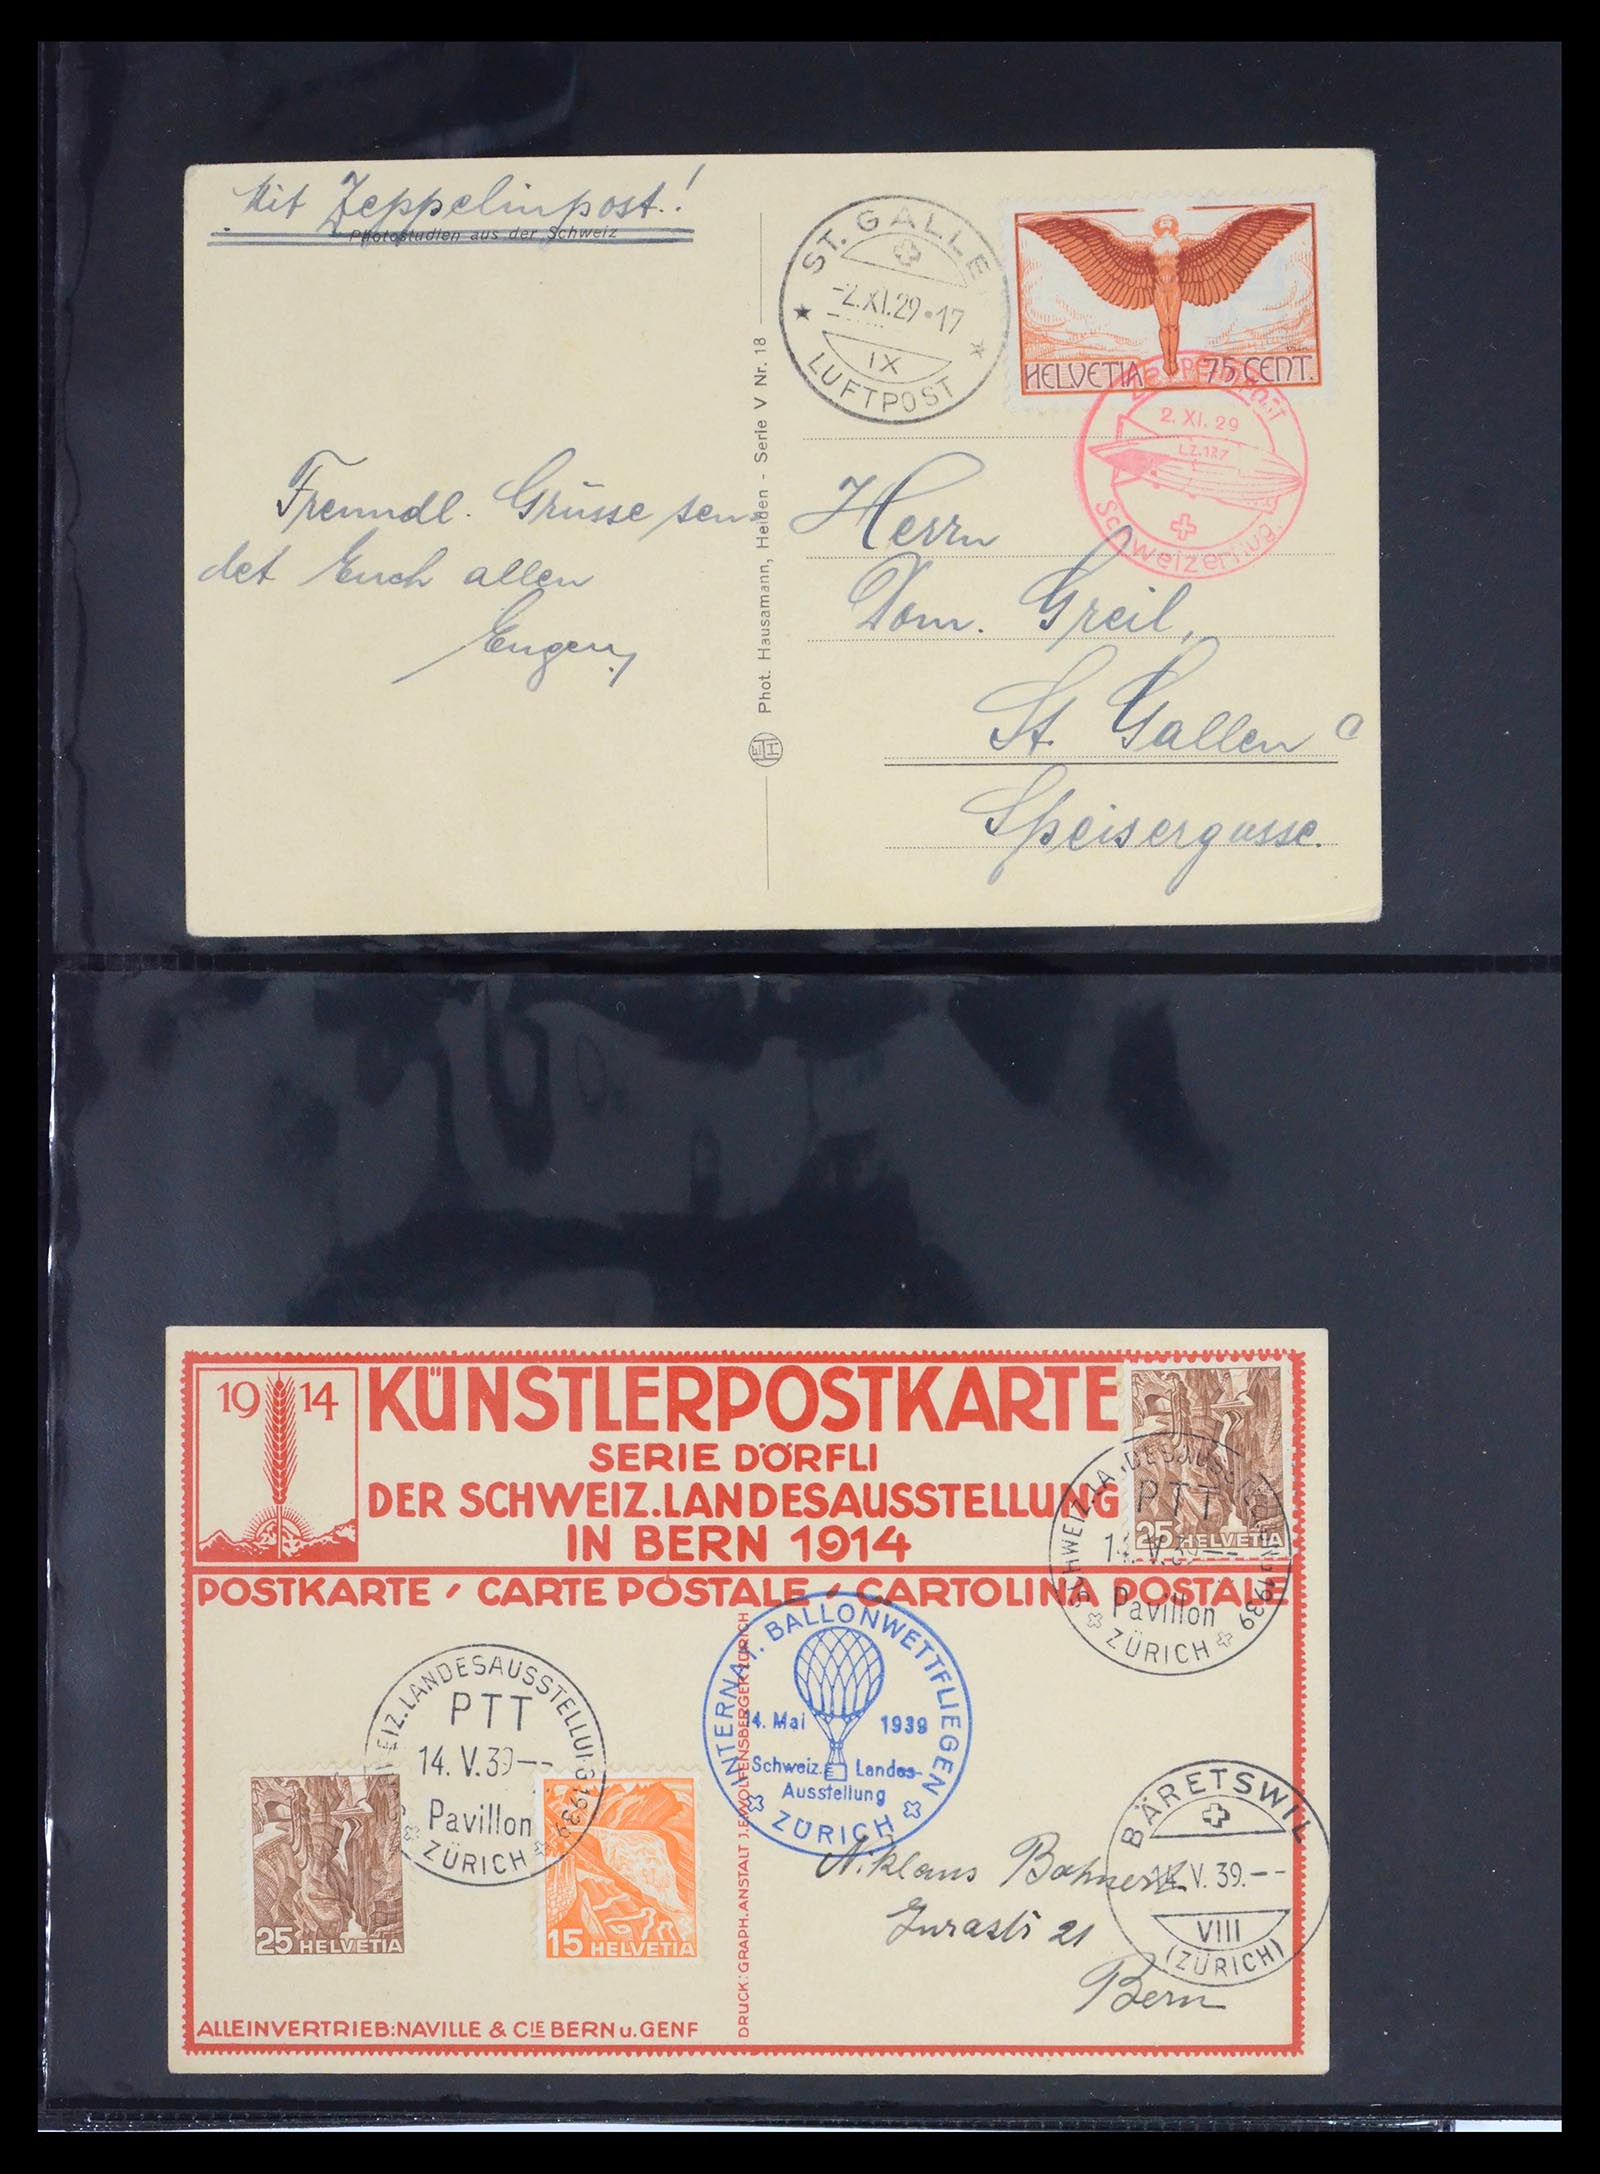 39533 0004 - Stamp collection 39533 Zwitserland airmail covers 1925-1960.